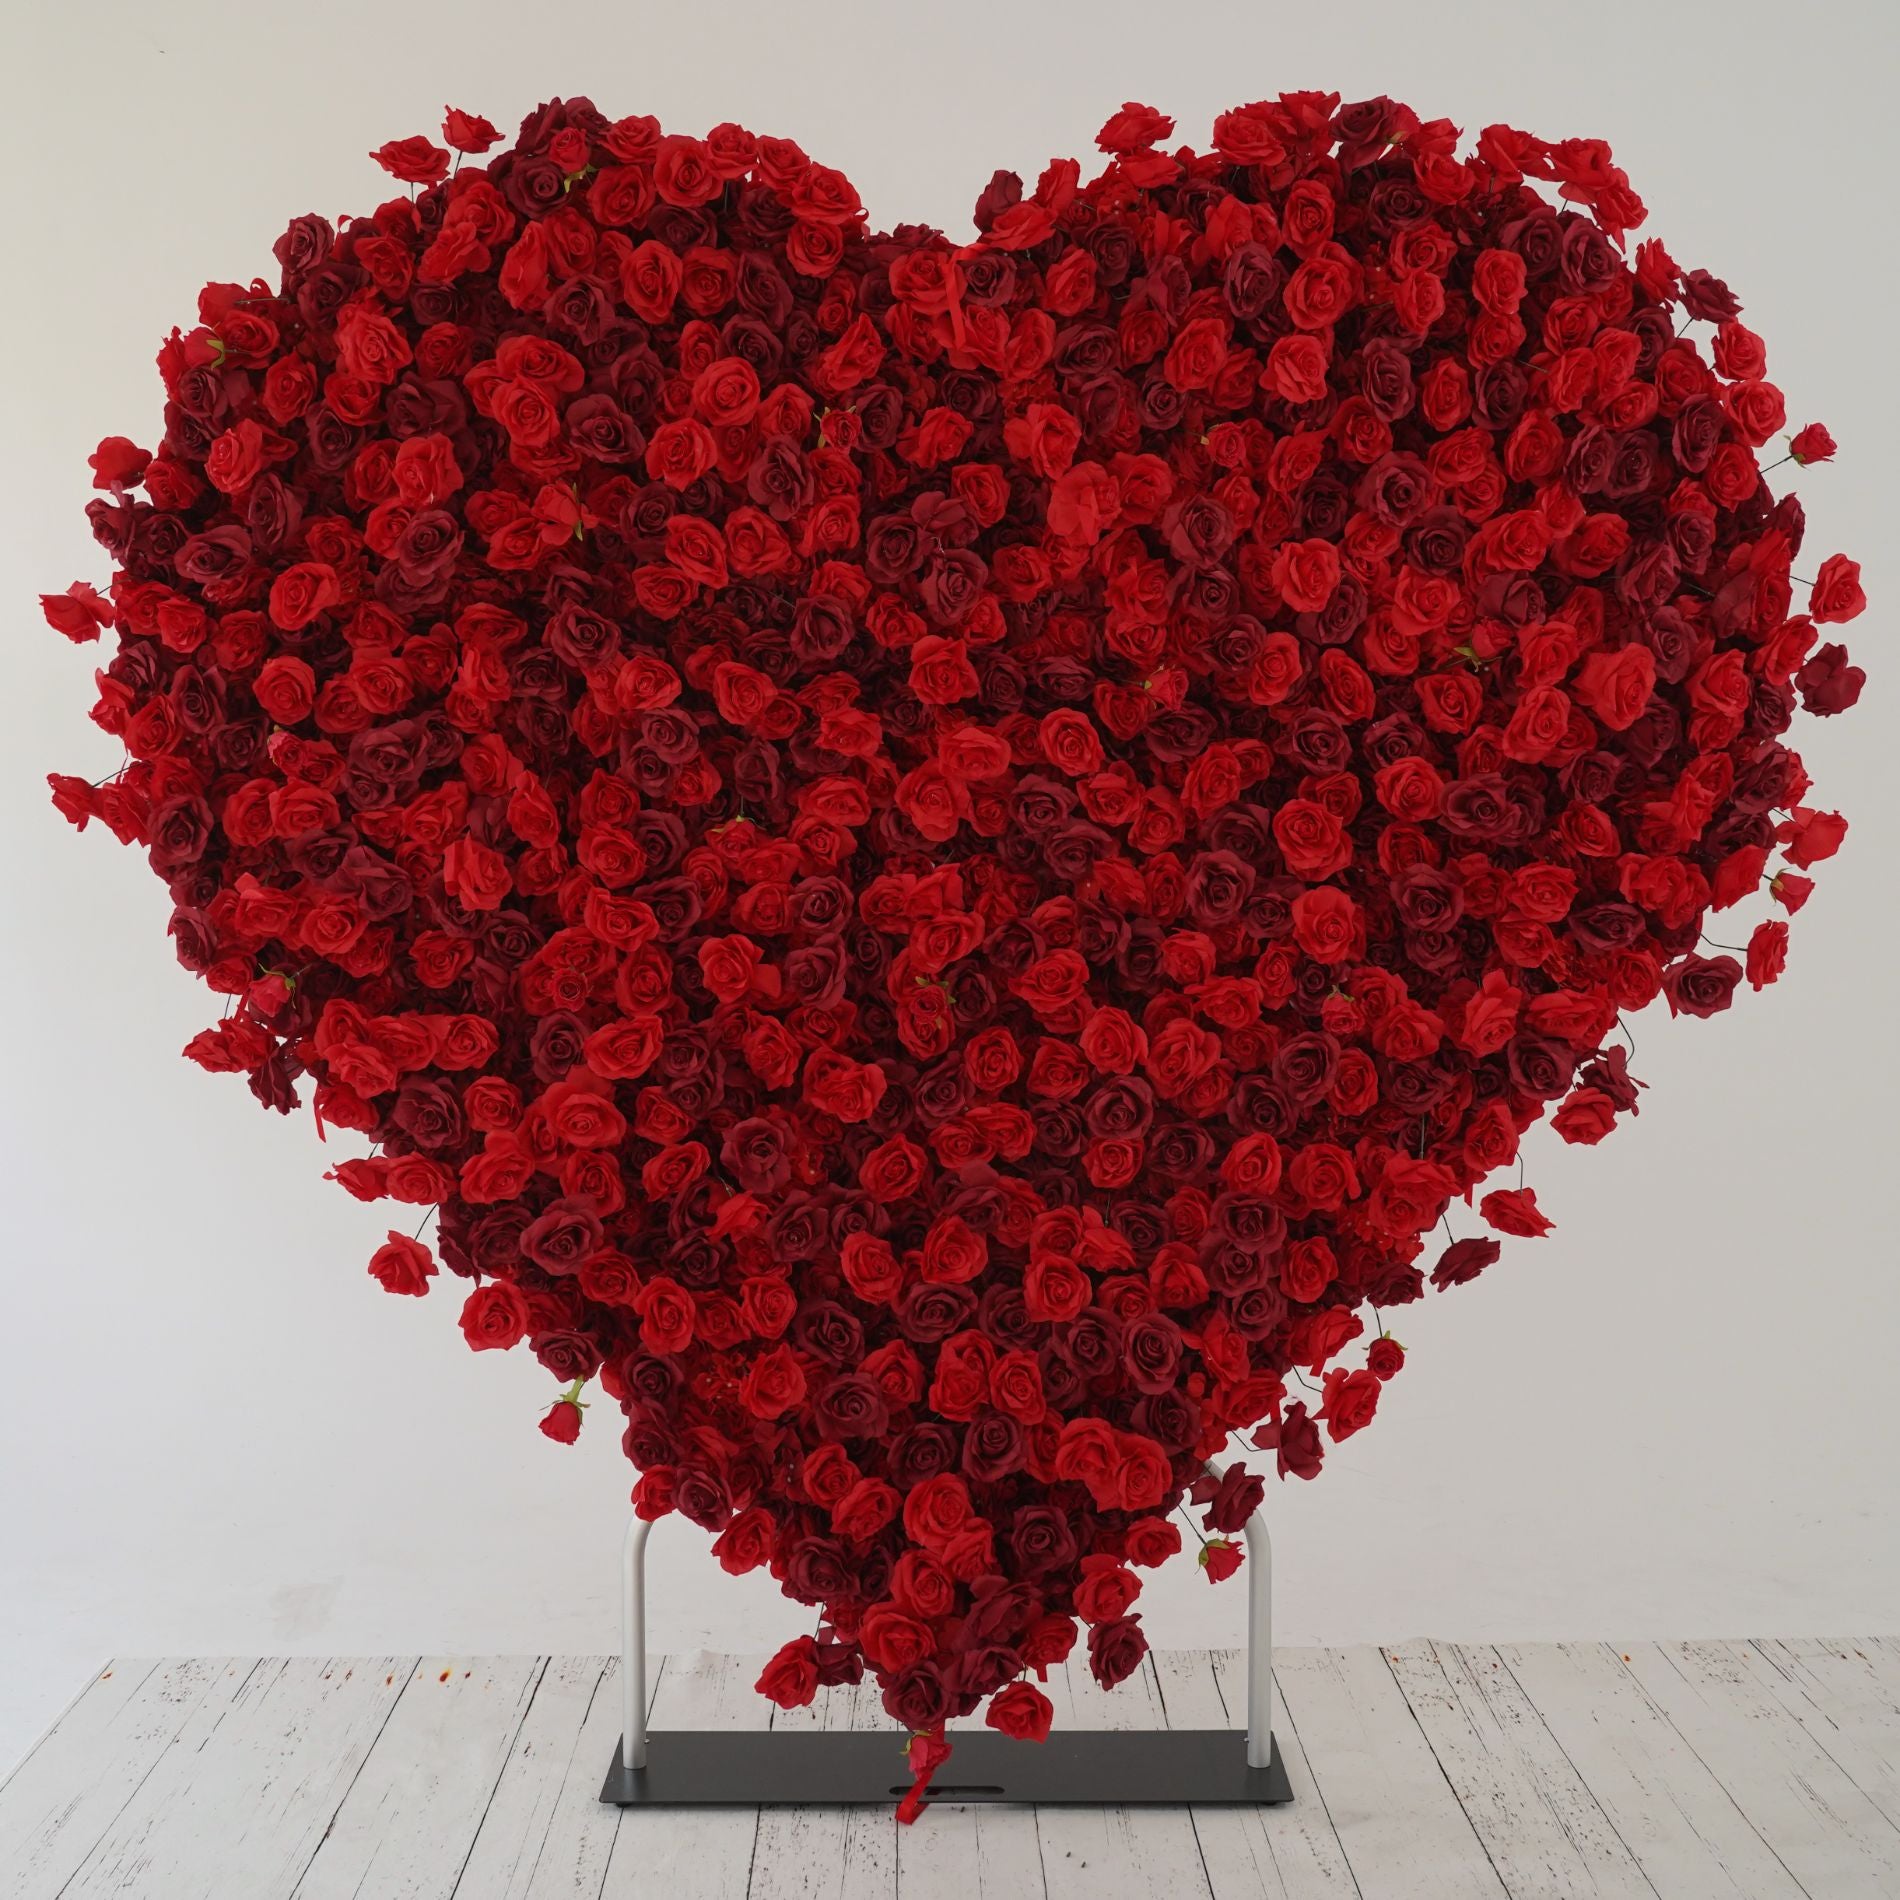 The heart shaped red rose flower wall looks warm and romantic.